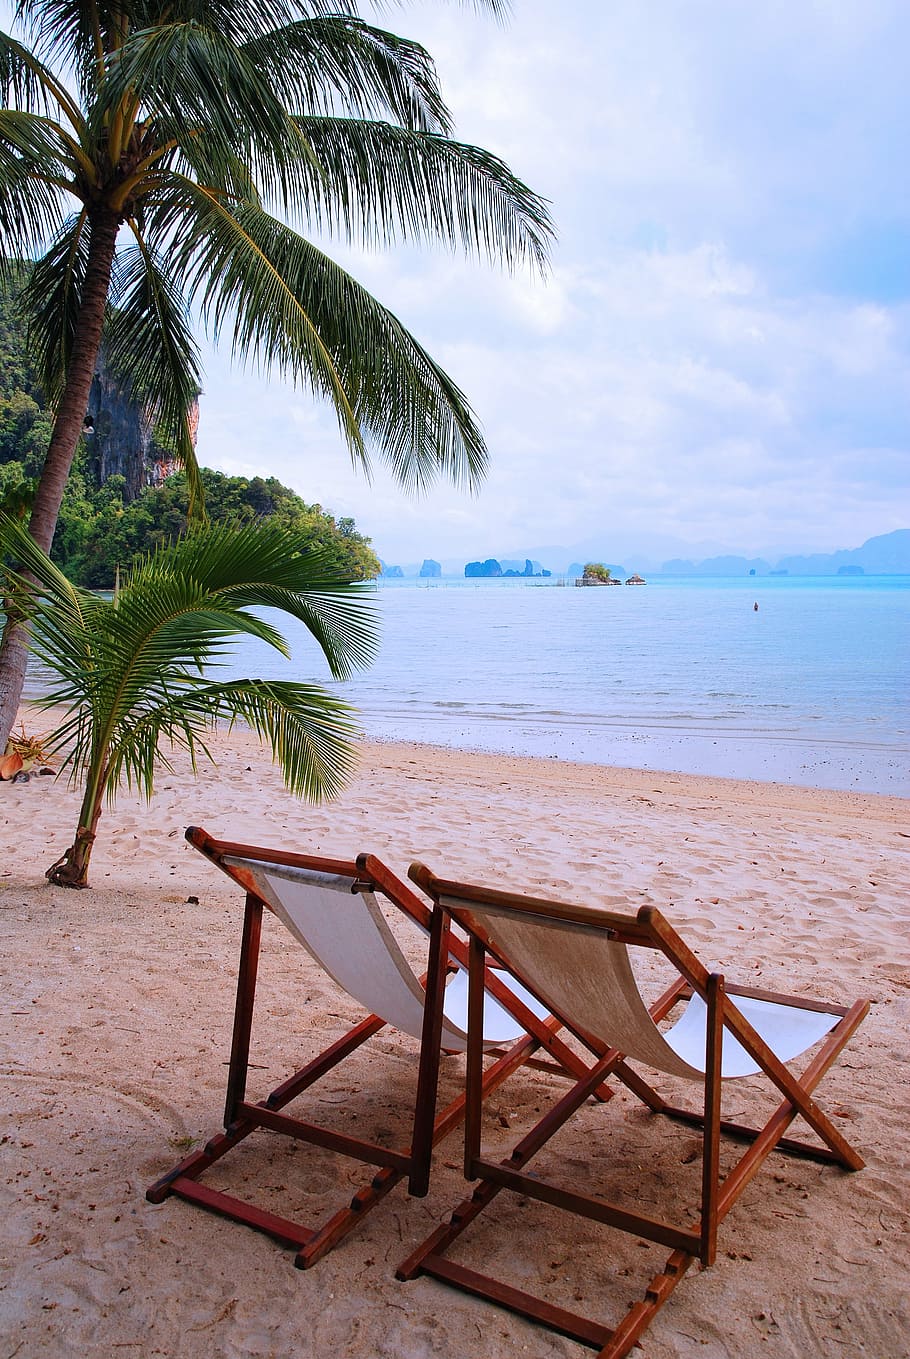 two, brown, wooden, lounges, thailand, sand beach, holiday, palm trees, beach, sea